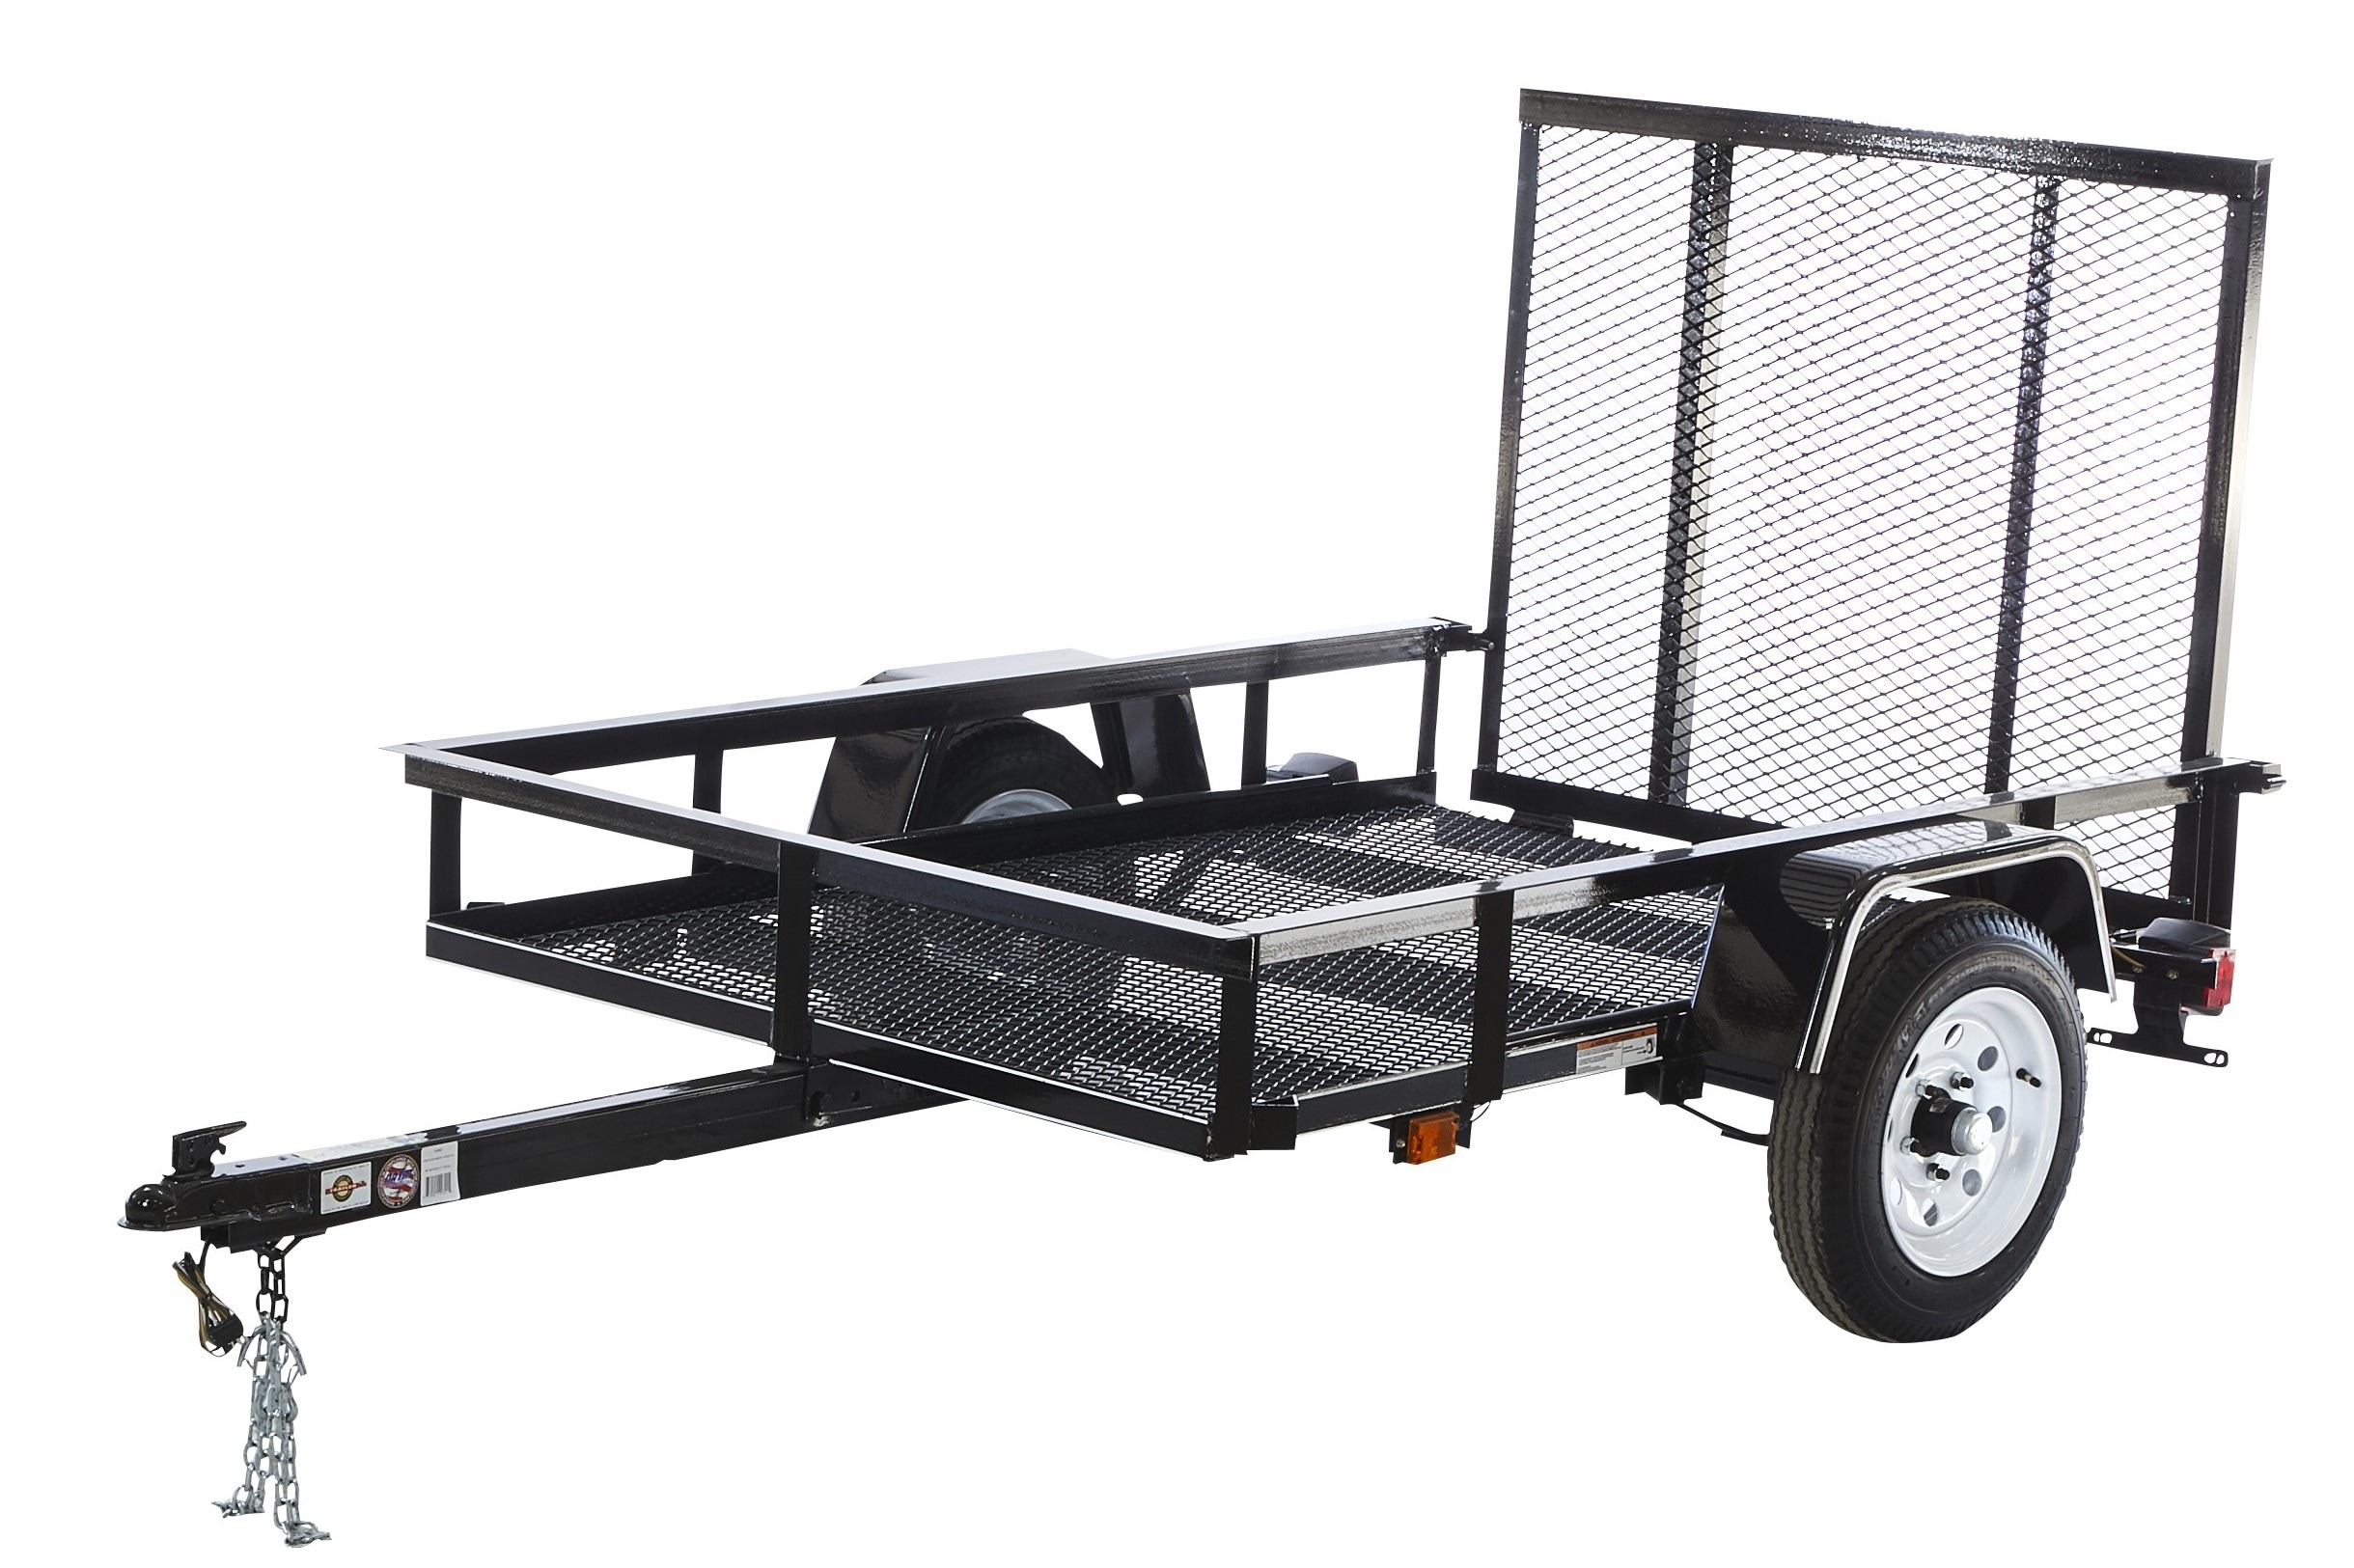 tractor supply trailer rental cost